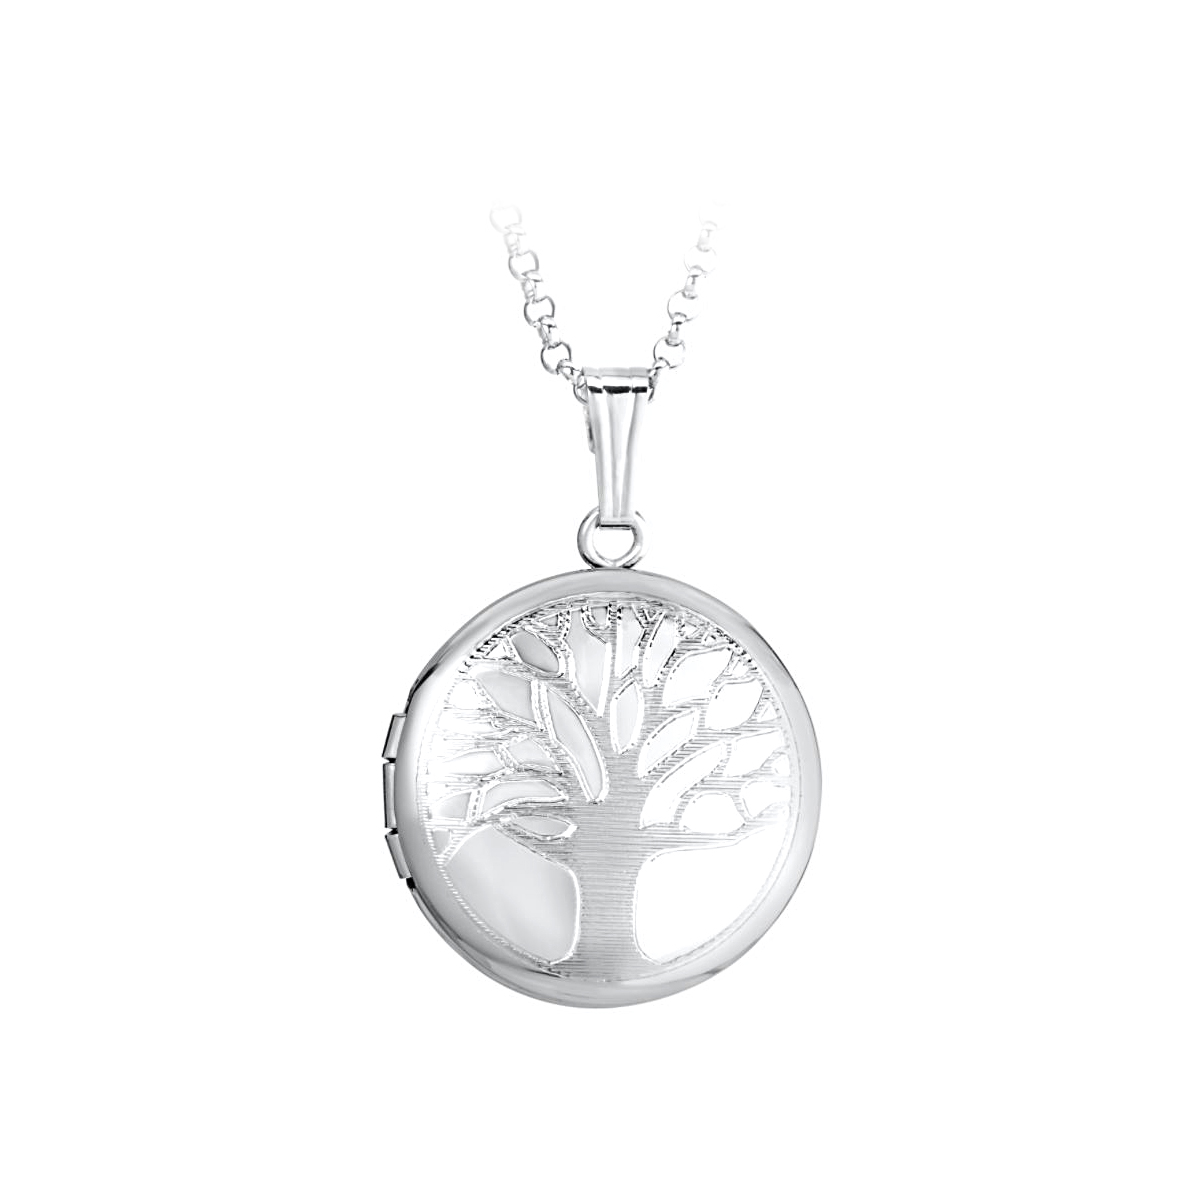 Sterling silver Engraved Tree Round Locket